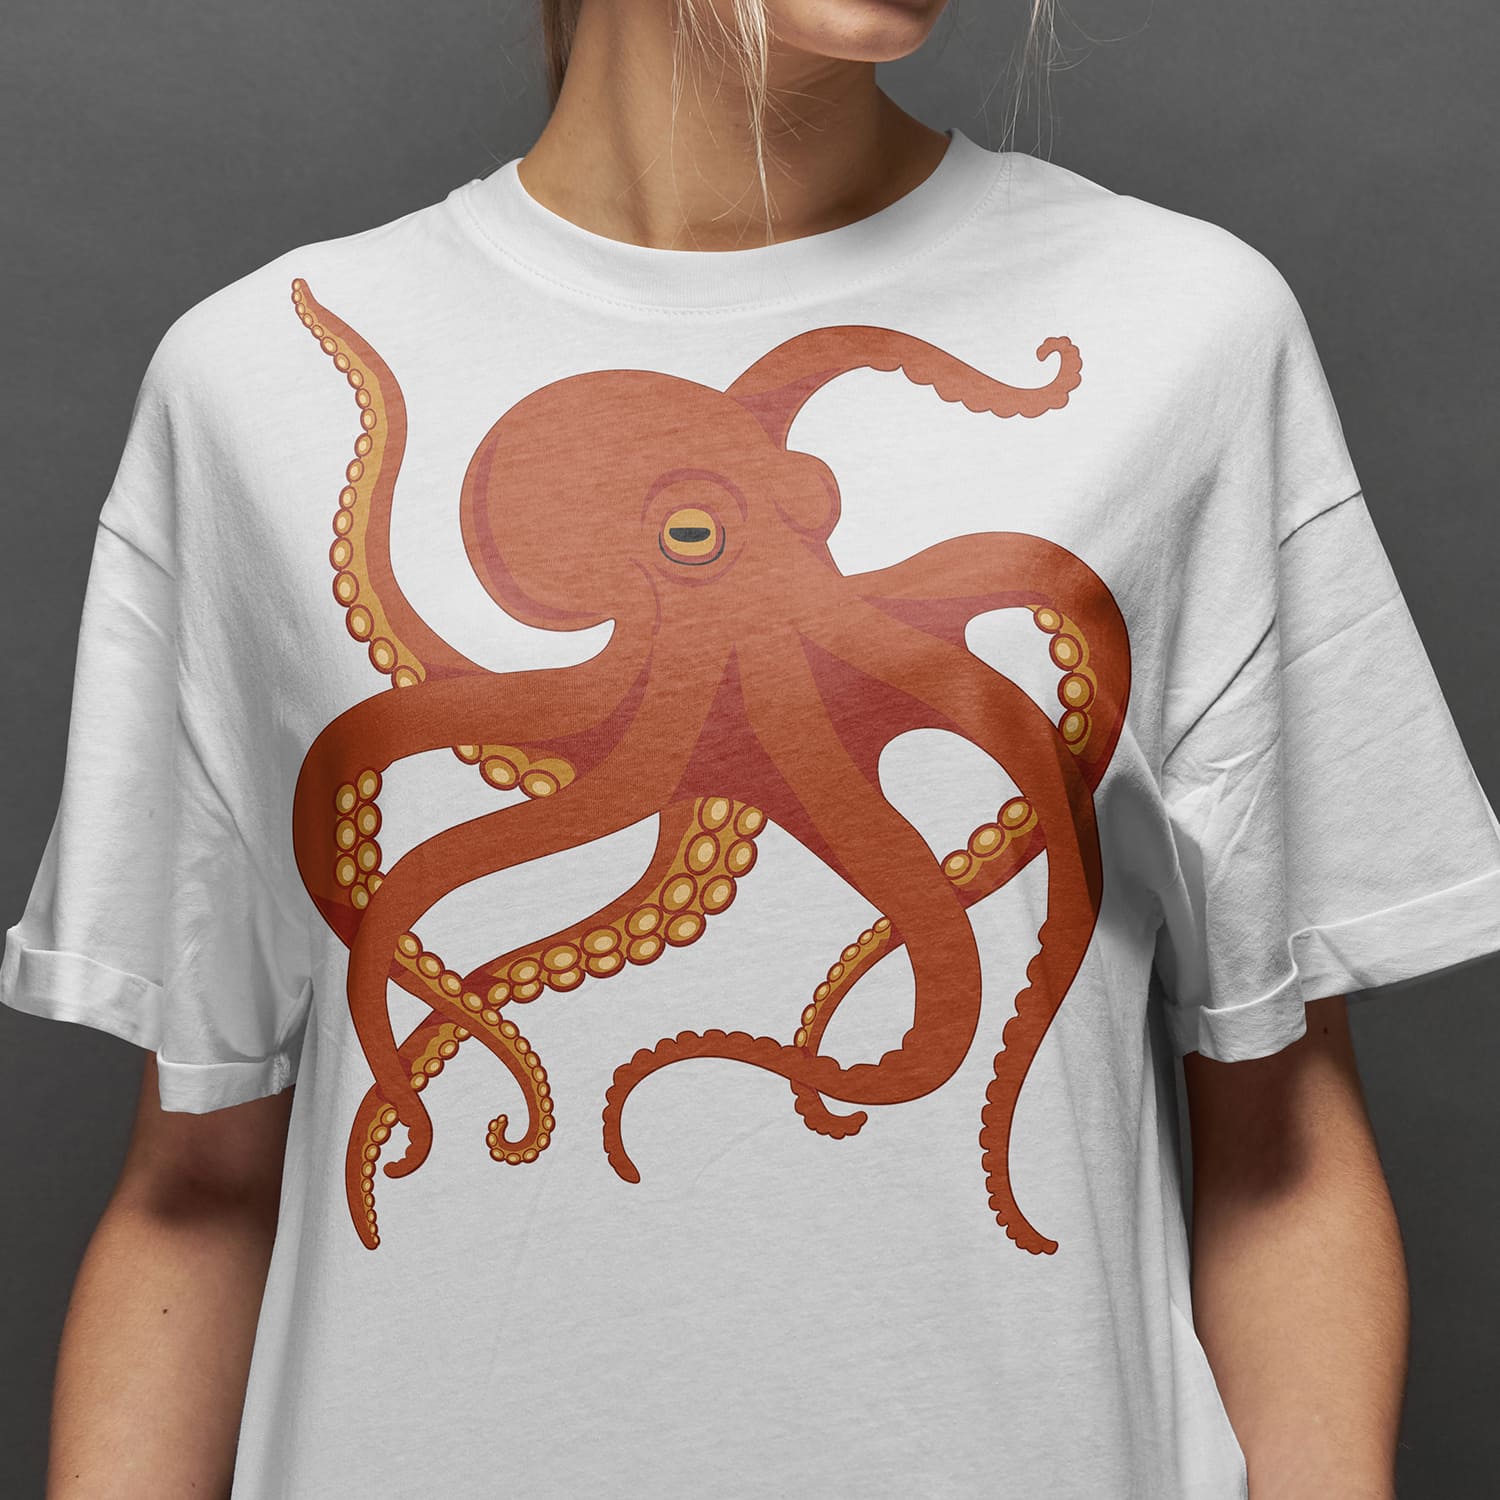 Woman wearing a white t - shirt with an orange octopus on it.